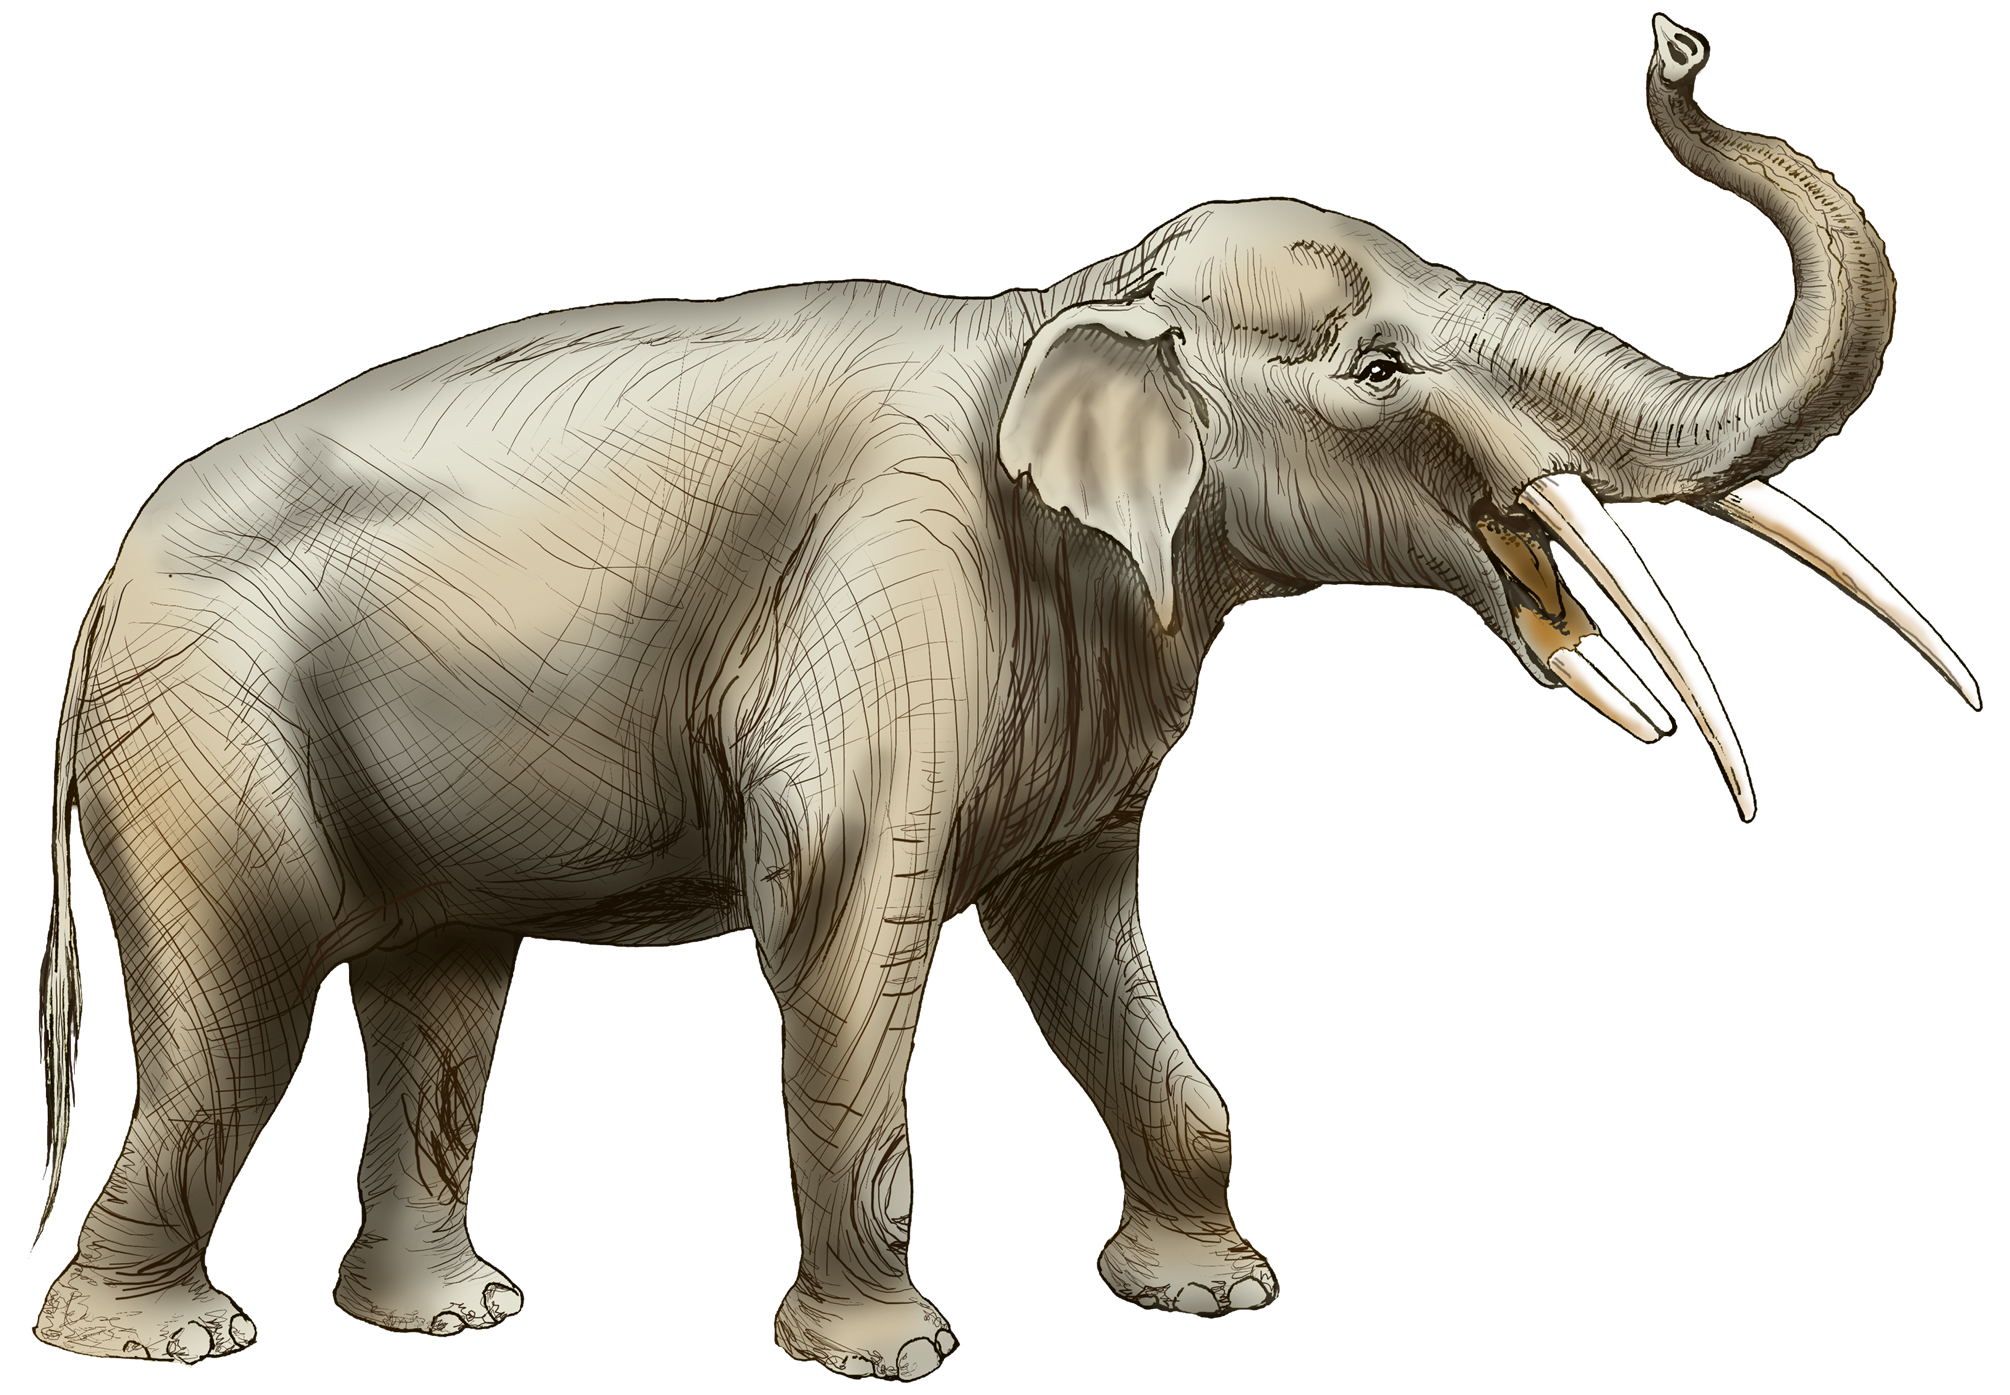 Illustration of a gomphothere